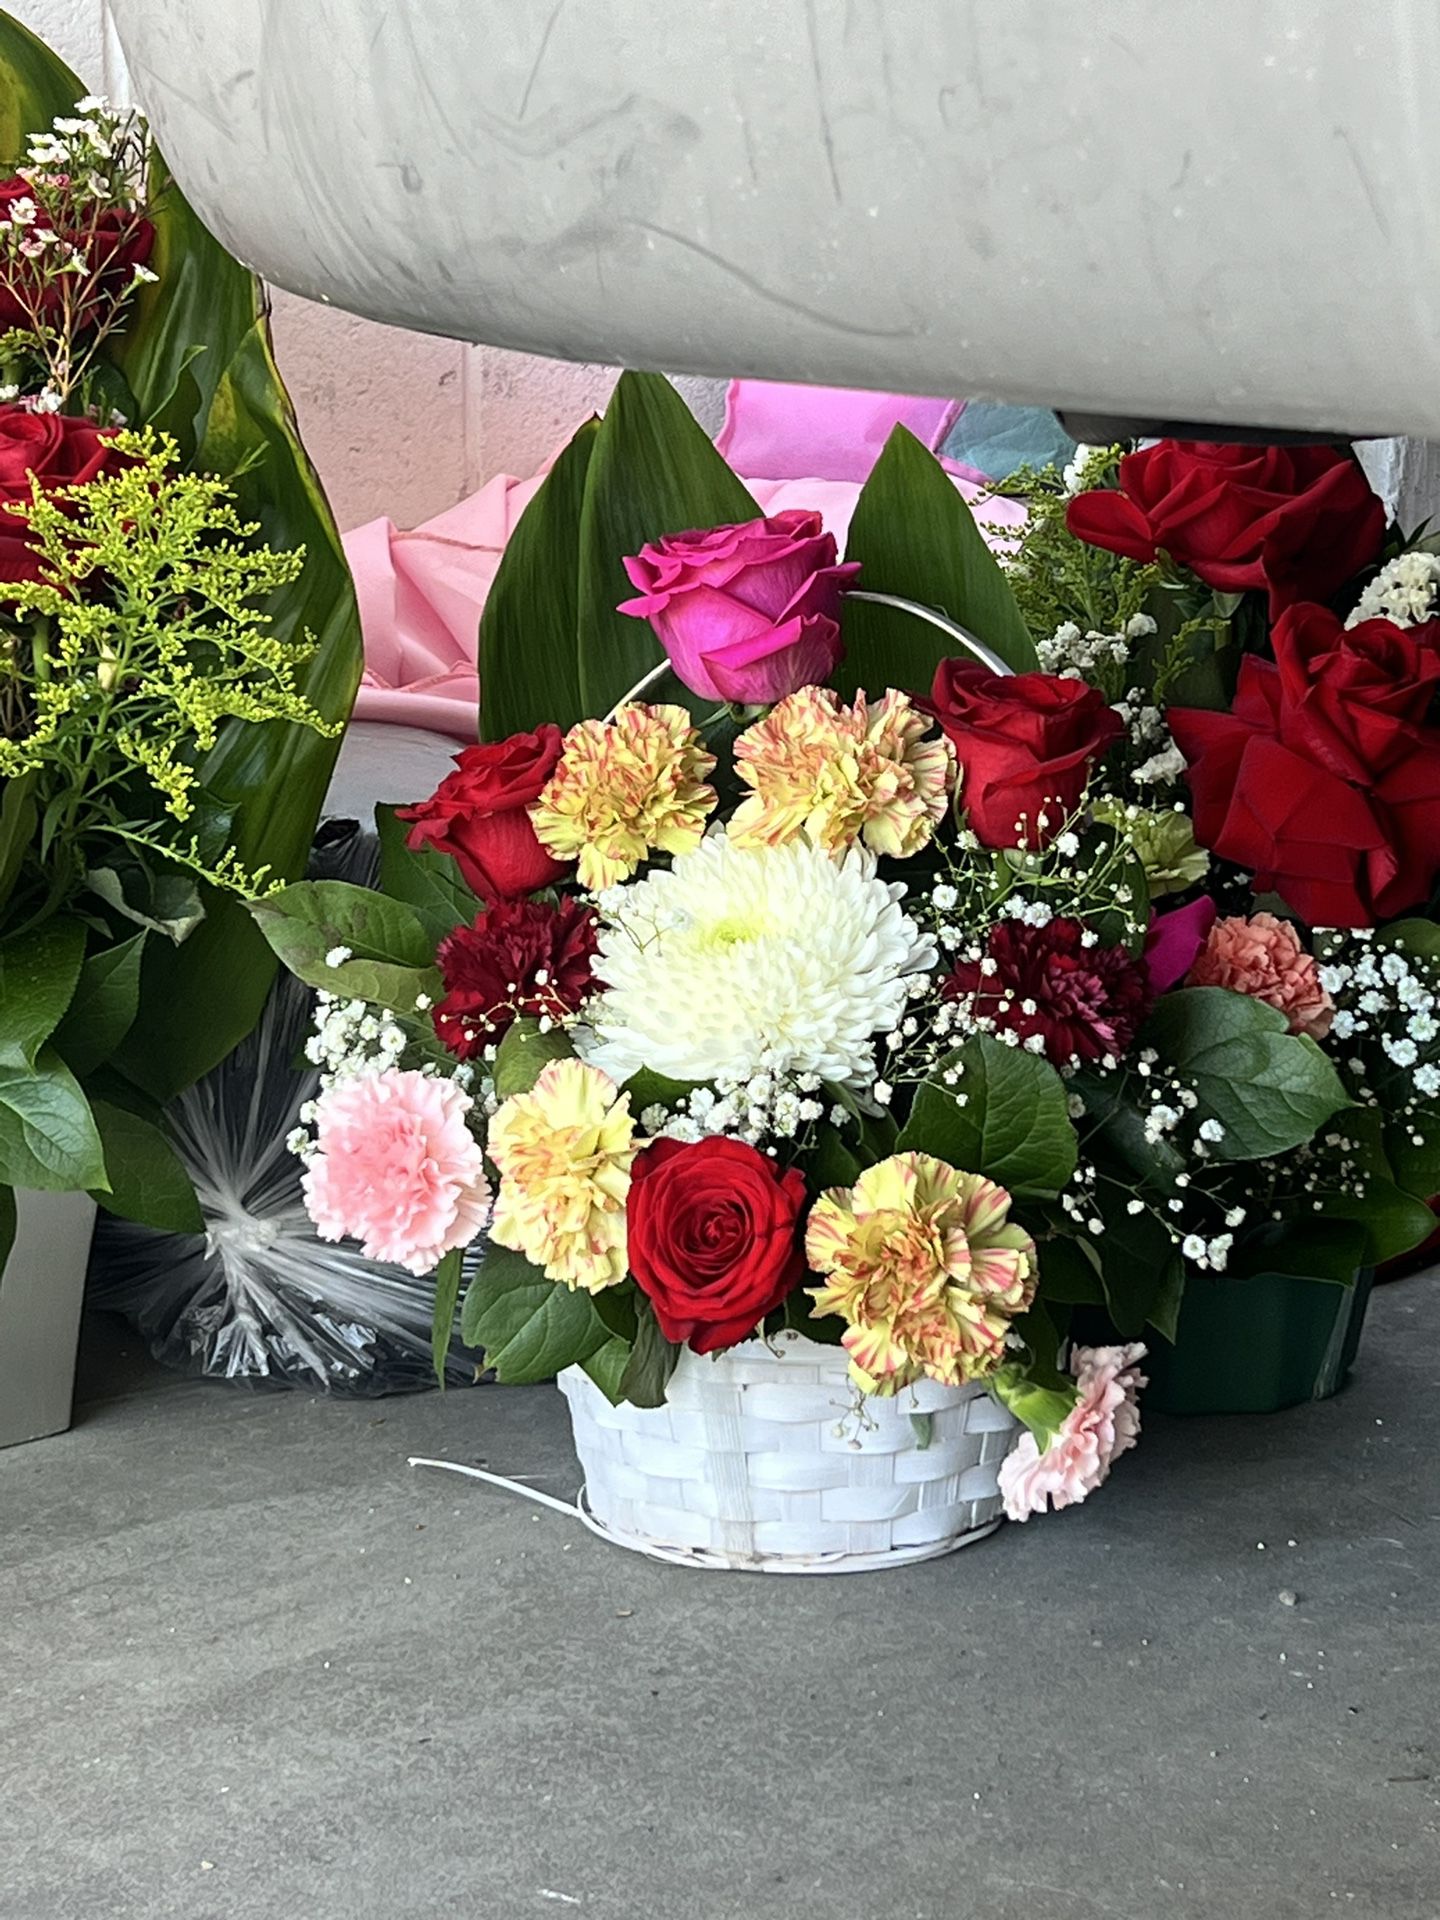 New Flower Arrangments For Special Occasions Birthdays Or Holidays